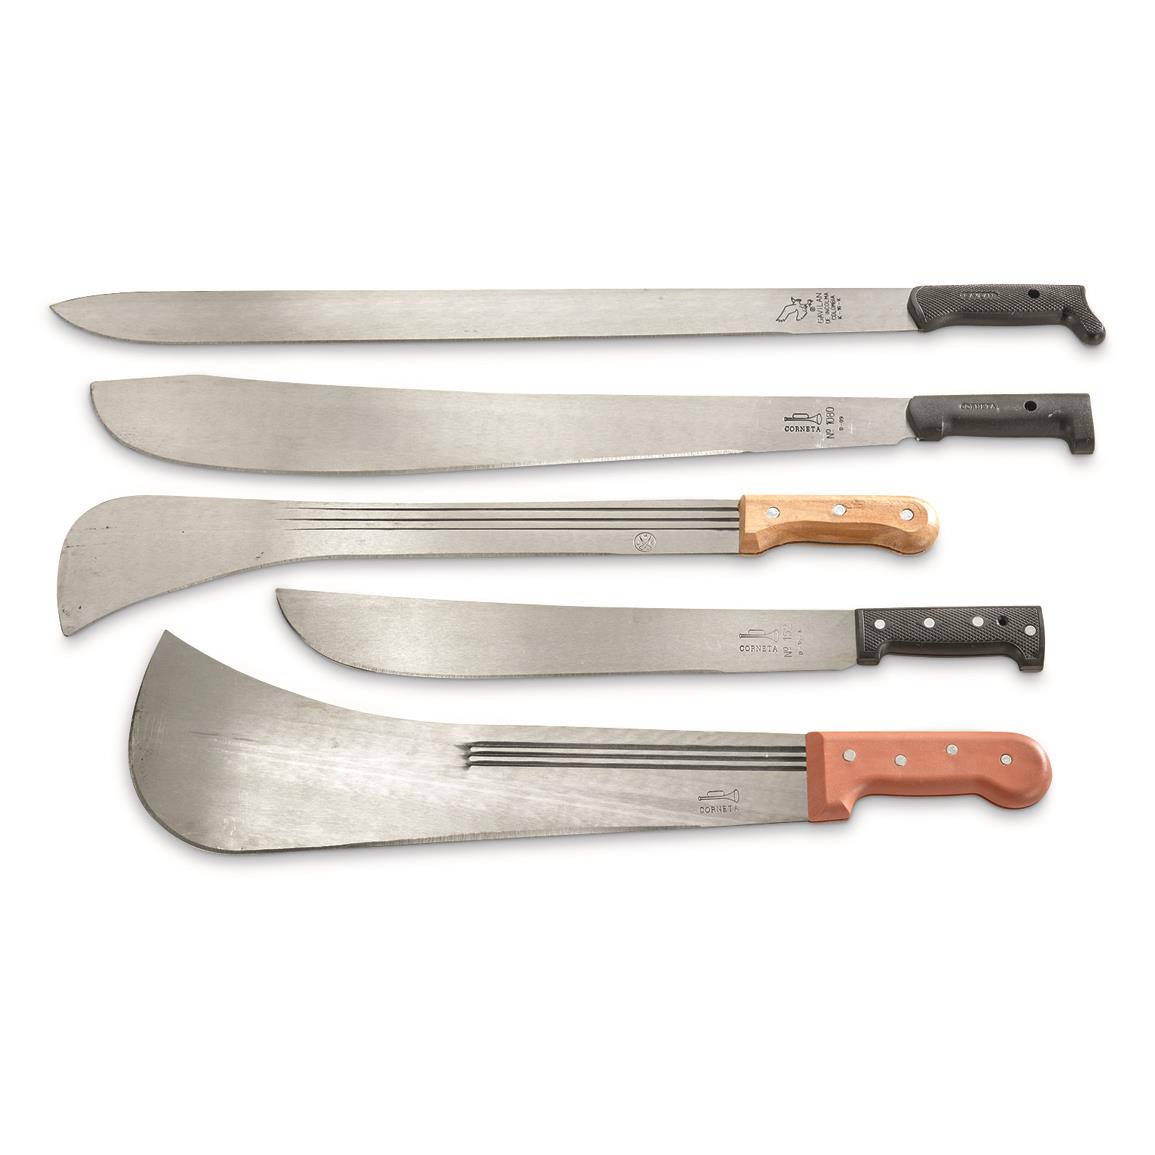 Colombian Military Surplus Assorted Machete Knives, 5 Pack, New